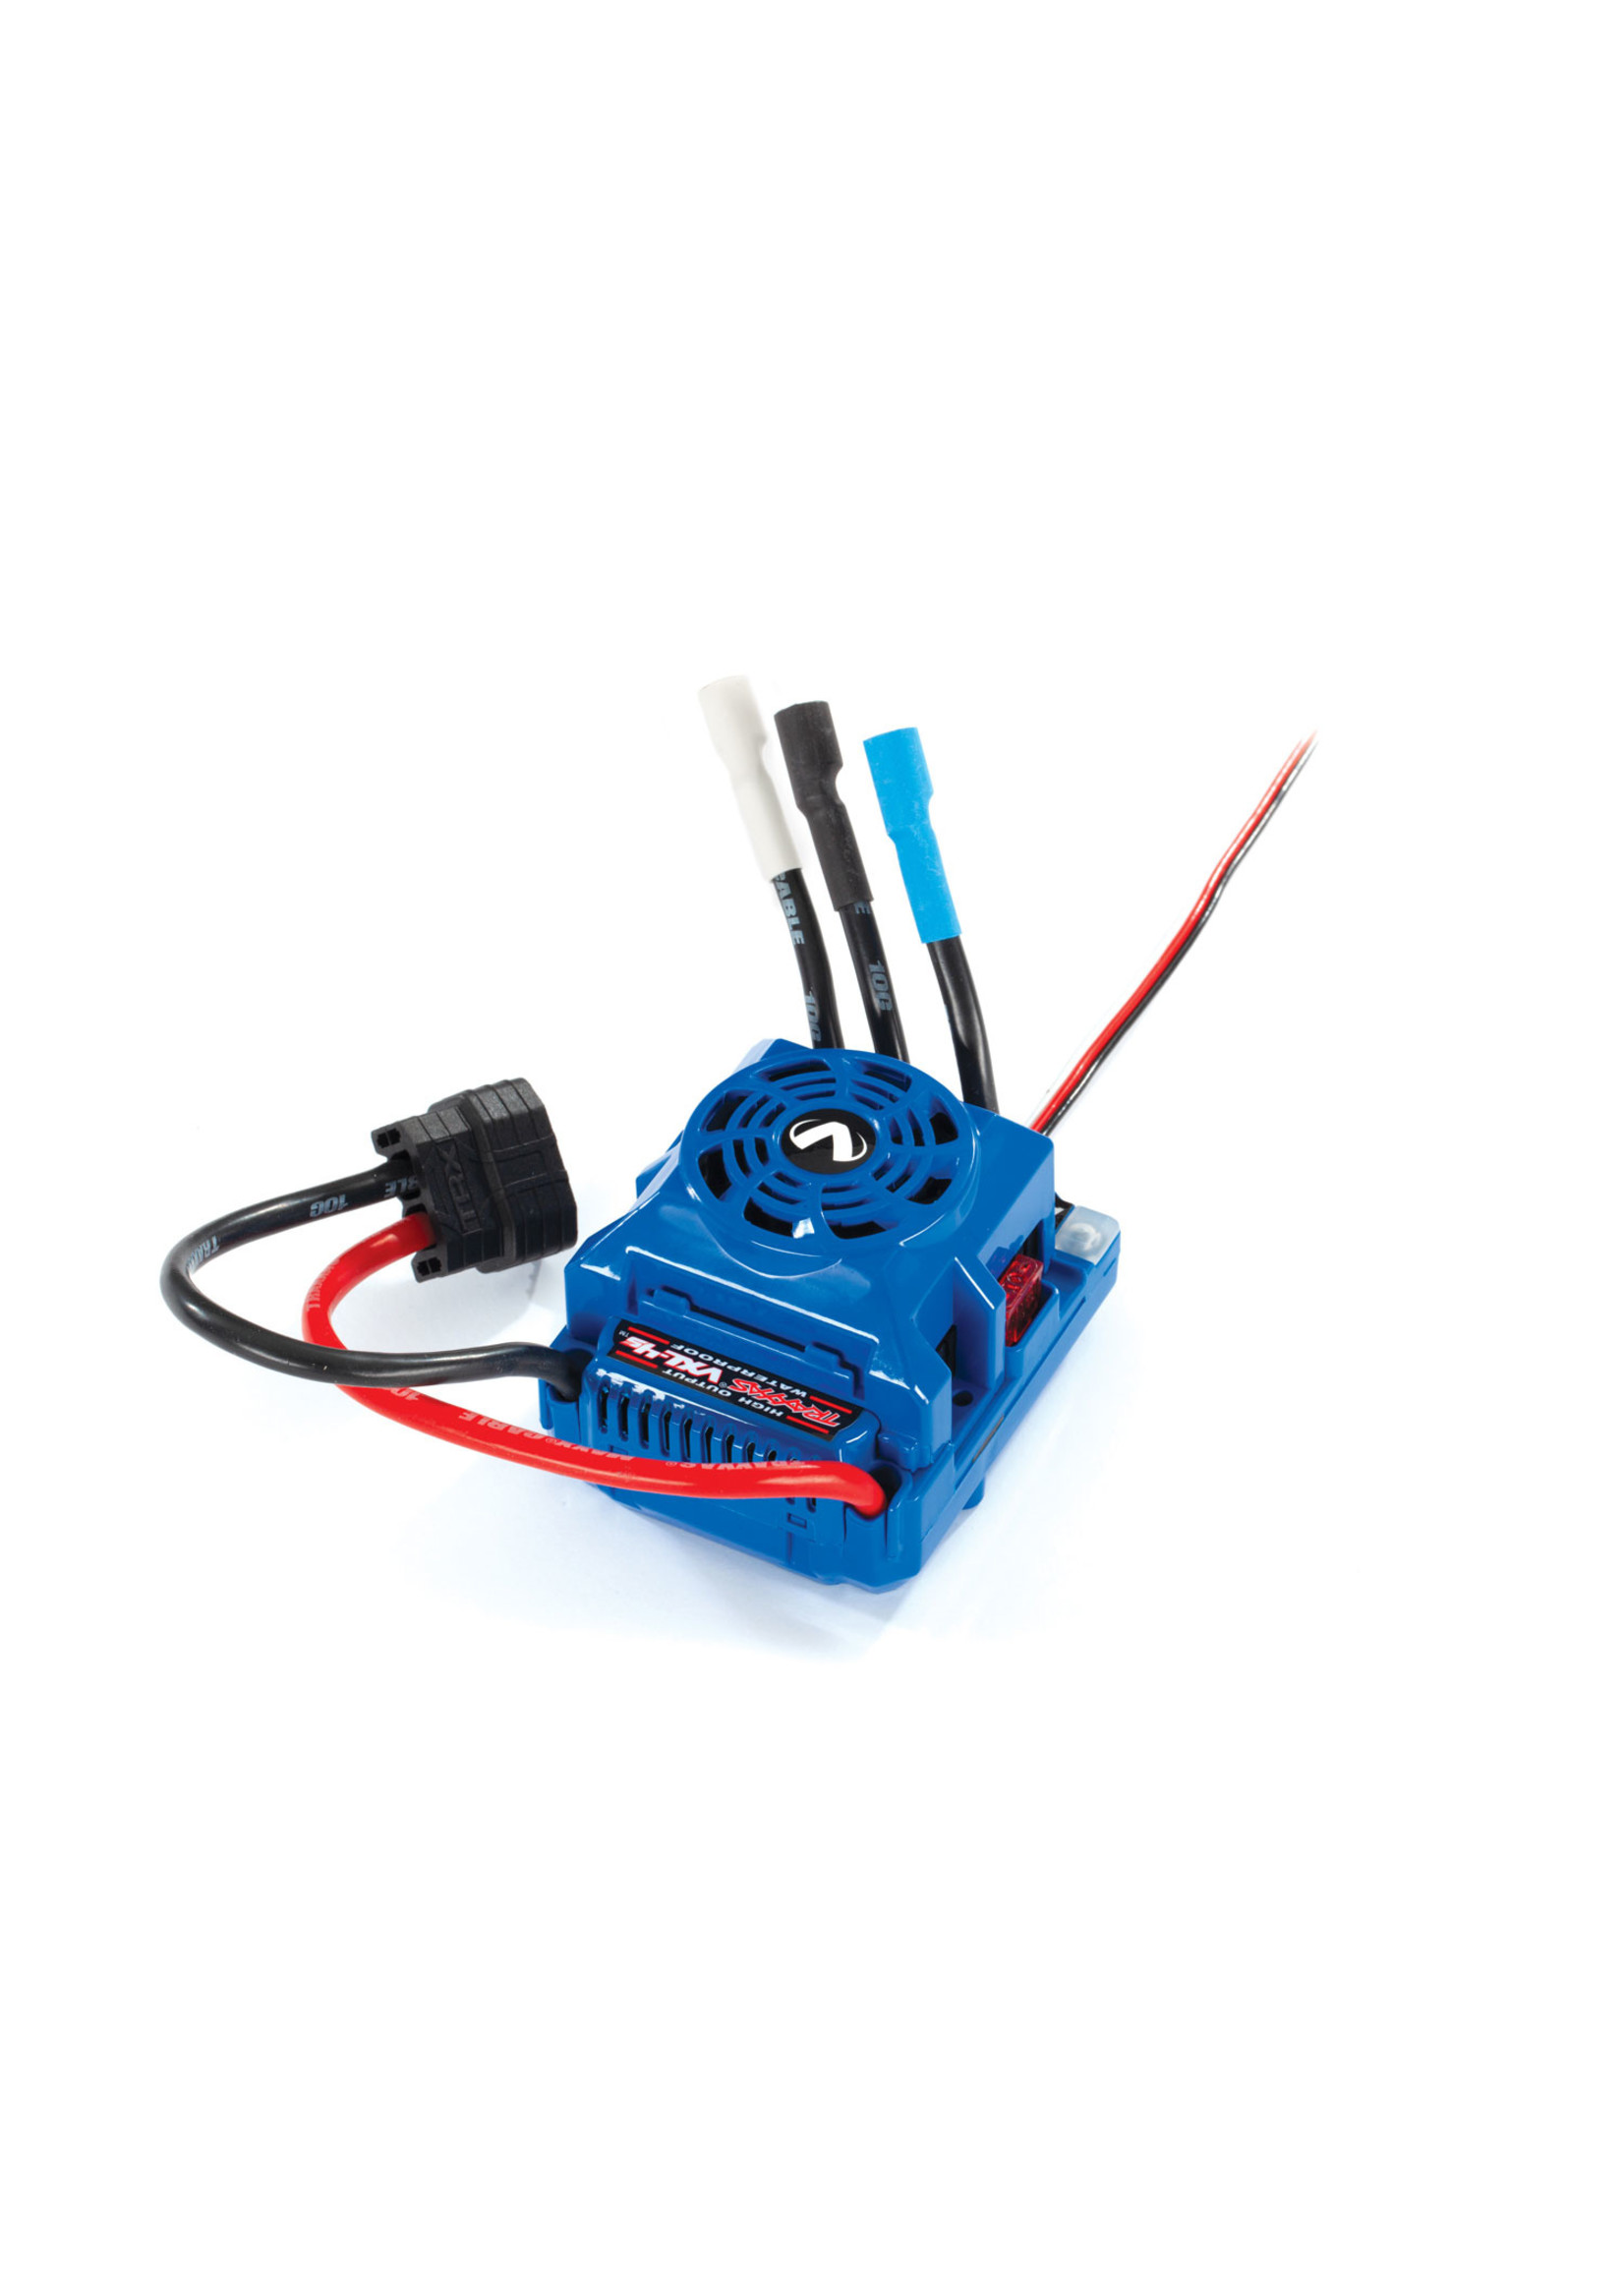 Traxxas TRA3465T Traxxas Velineon VXL-4s High Output Electronic Speed Control, waterproof (brushless) (fwd/rev/brake)